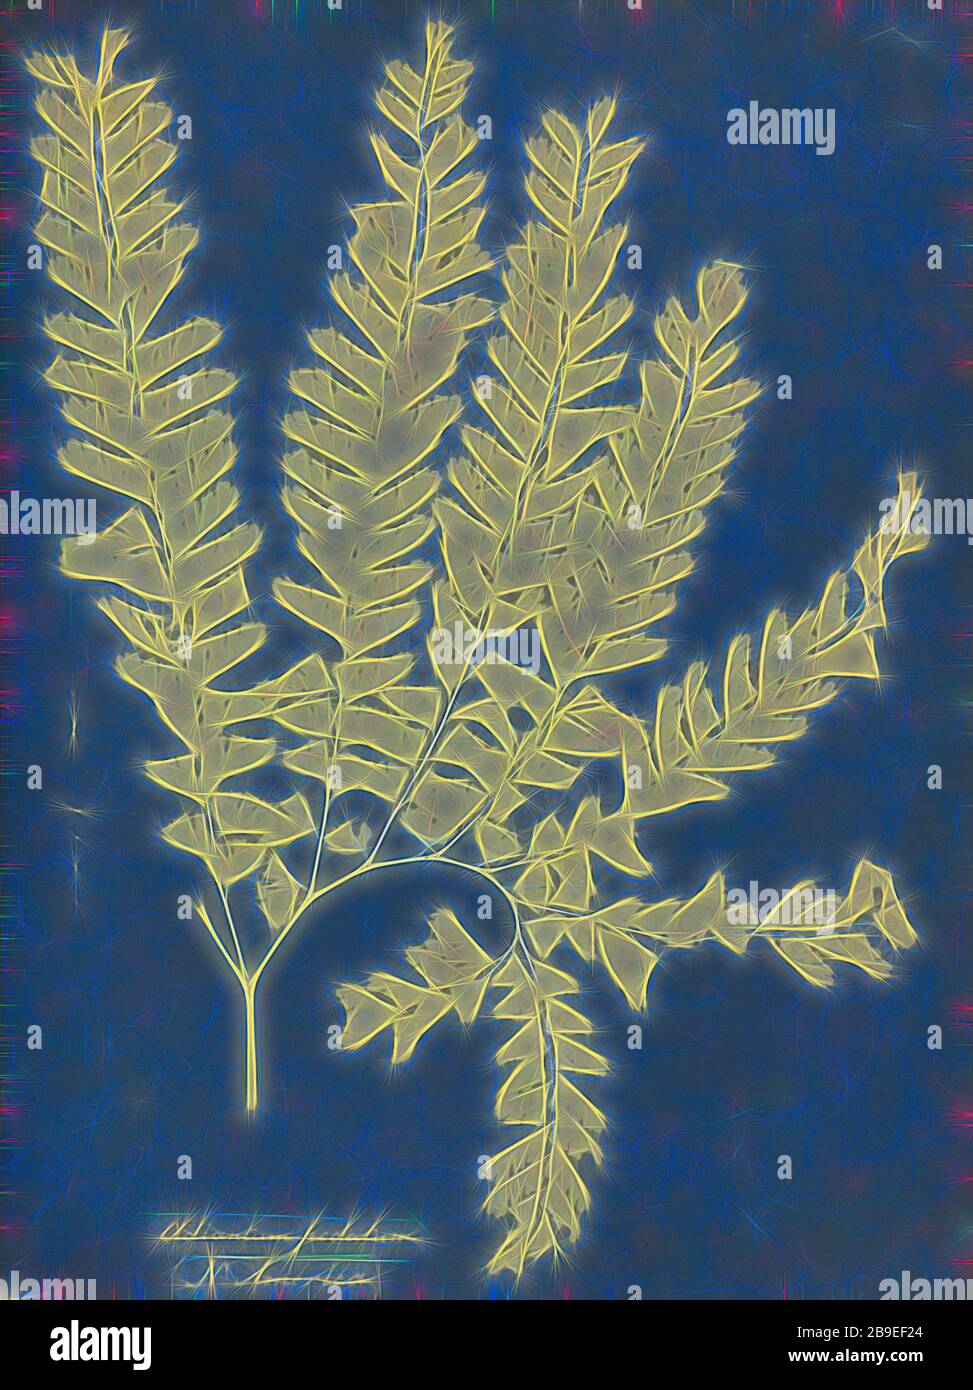 Adiantum pedatum, N. America, Anna Atkins (British, 1799 - 1871), England, 1853, Cyanotype, 25.4 × 19.4 cm (10 × 7 5,8 in, Reimagined by Gibon, design of warm cheerful glowing of brightness and light rays radiance. Classic art reinvented with a modern twist. Photography inspired by futurism, embracing dynamic energy of modern technology, movement, speed and revolutionize culture. Stock Photo